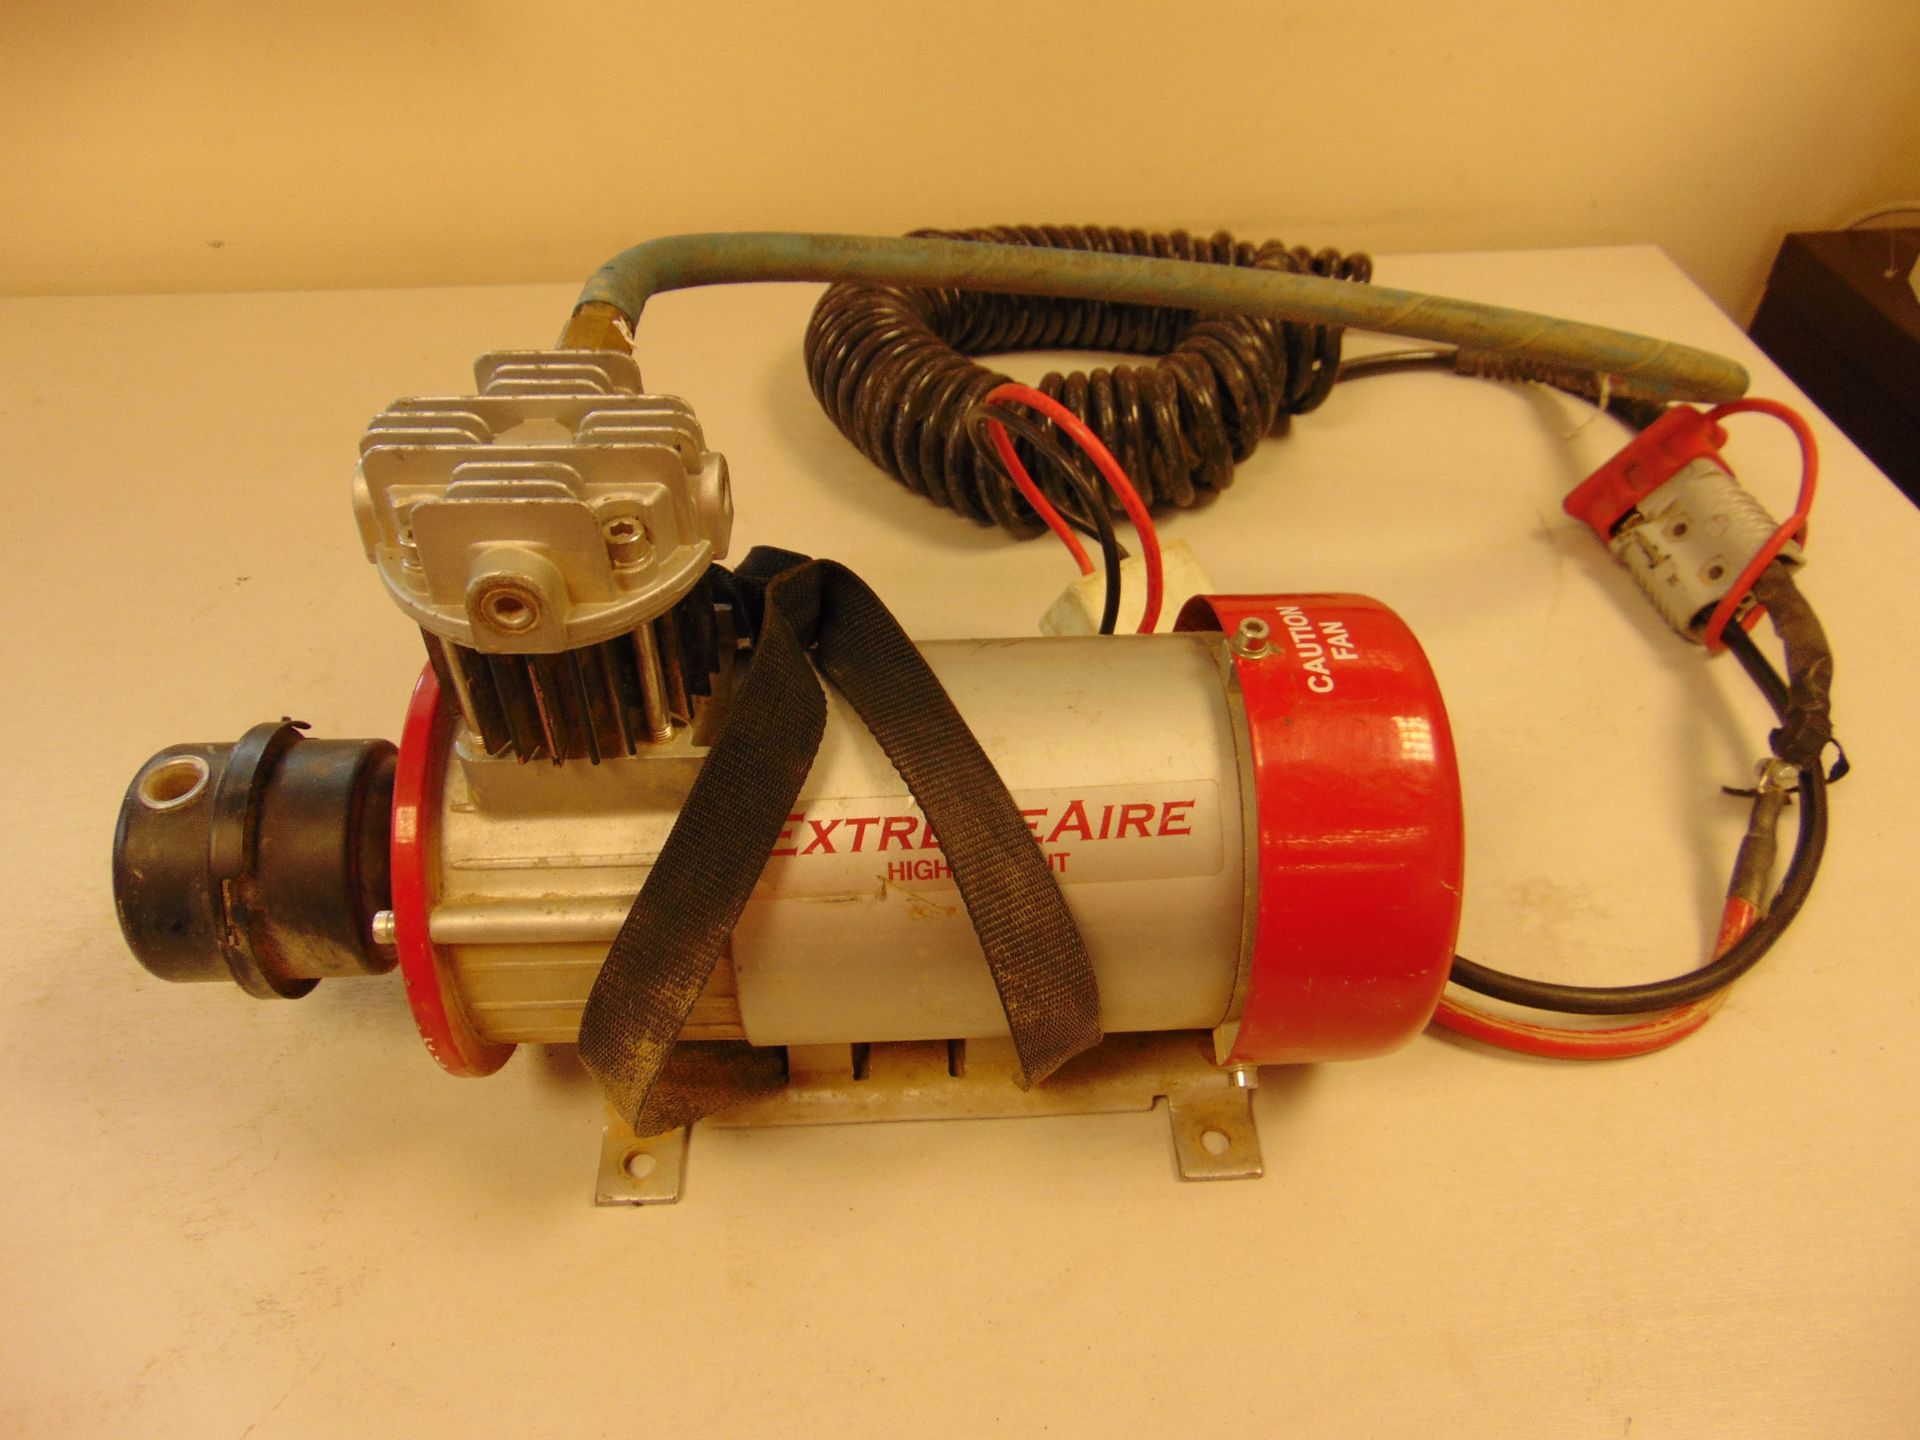 Extreme Aire - High Output Compressor. - Image 6 of 7